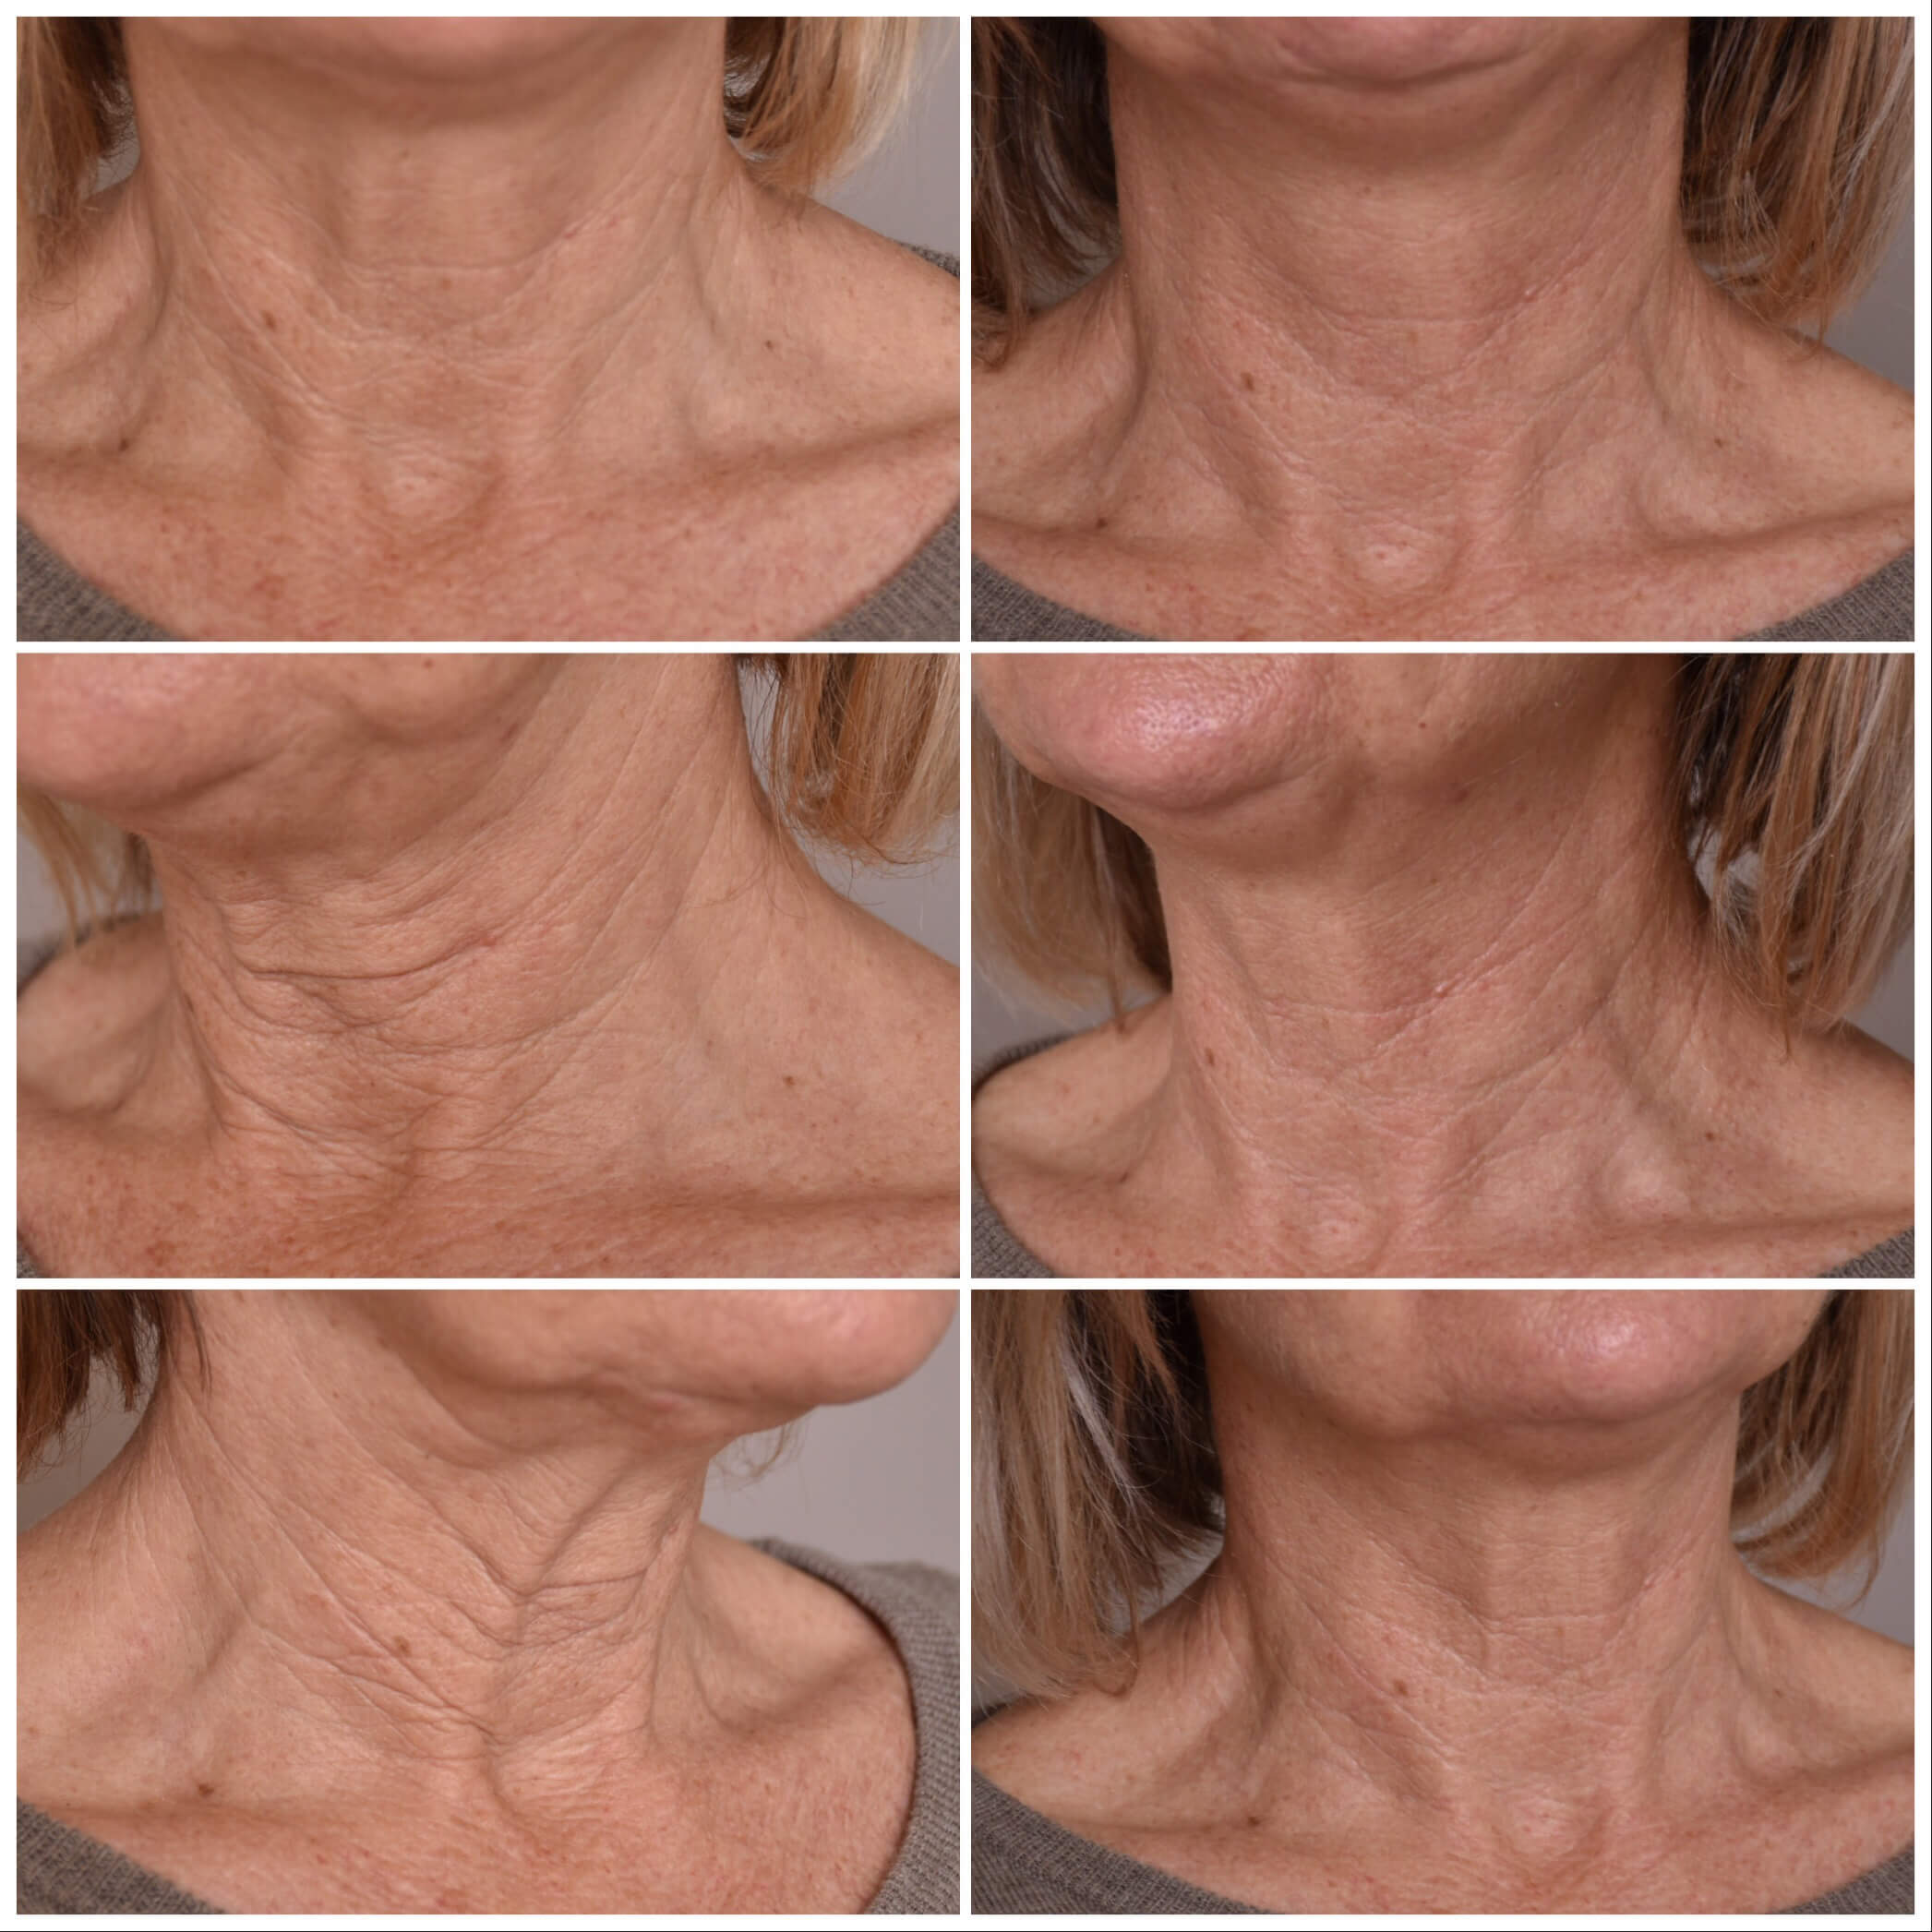 Laser Skin Tightening Treatments for Saggy Skin